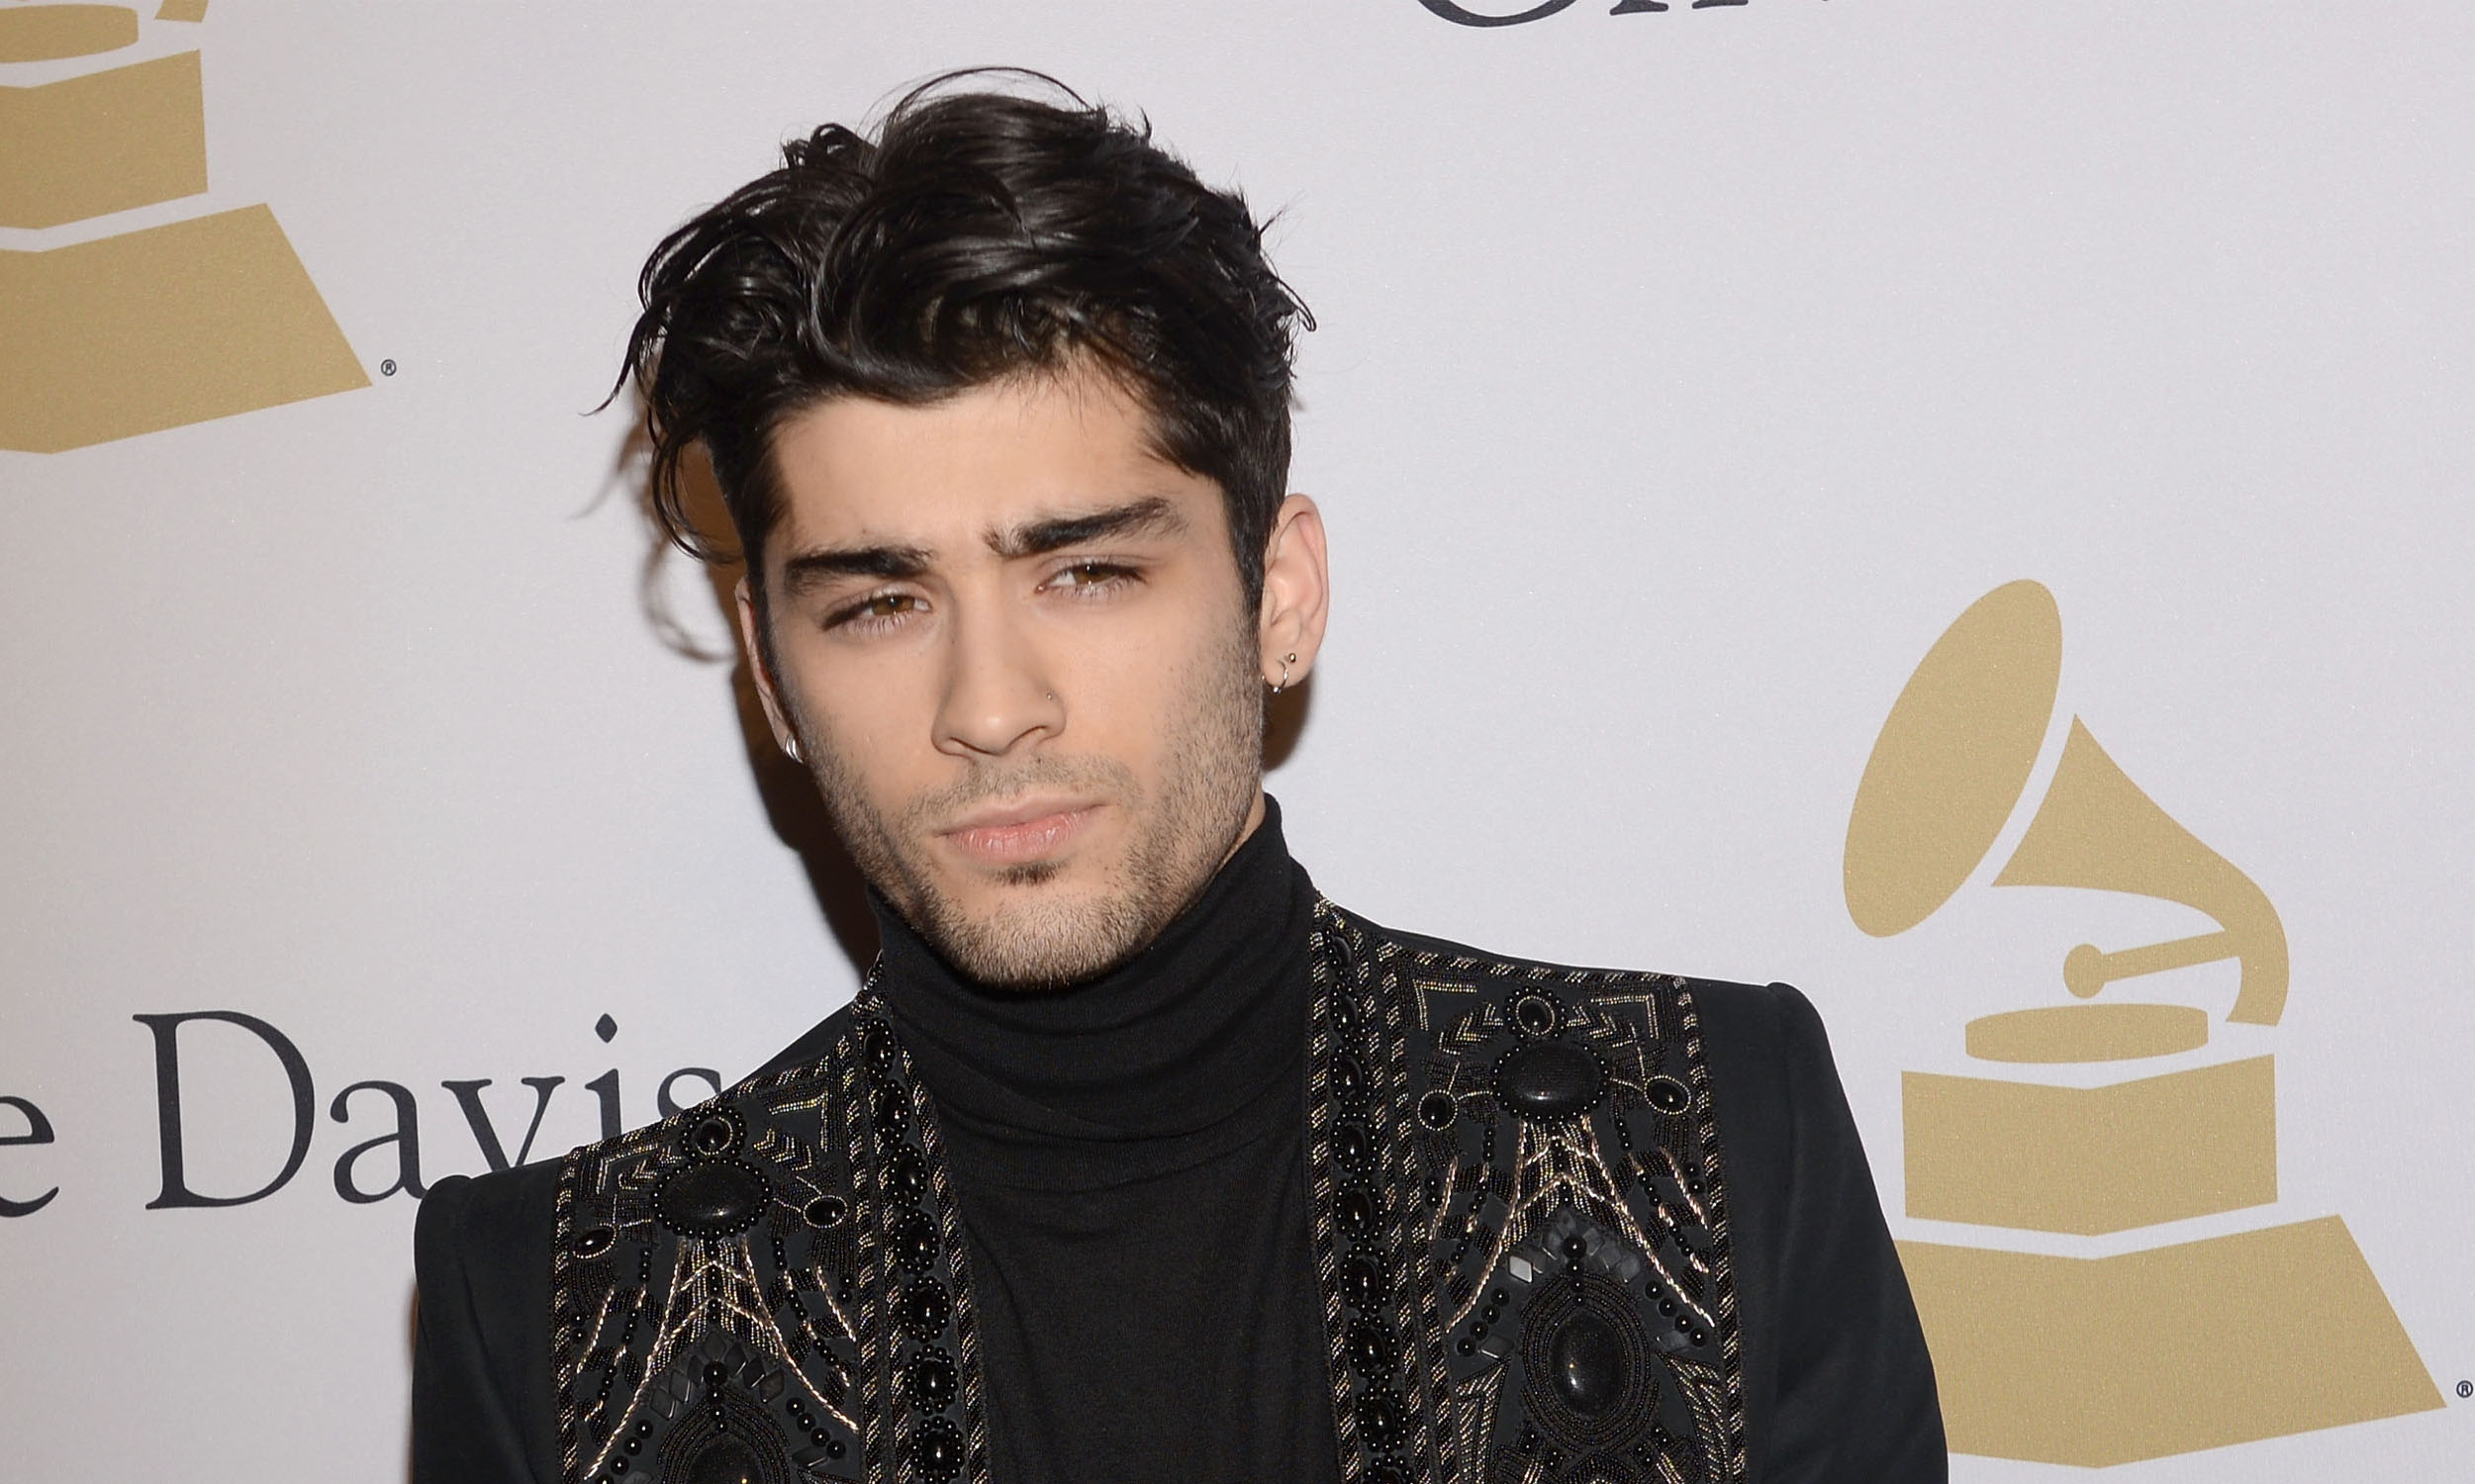 Selena Gomez and Zayn Malik are rumoured to be dating